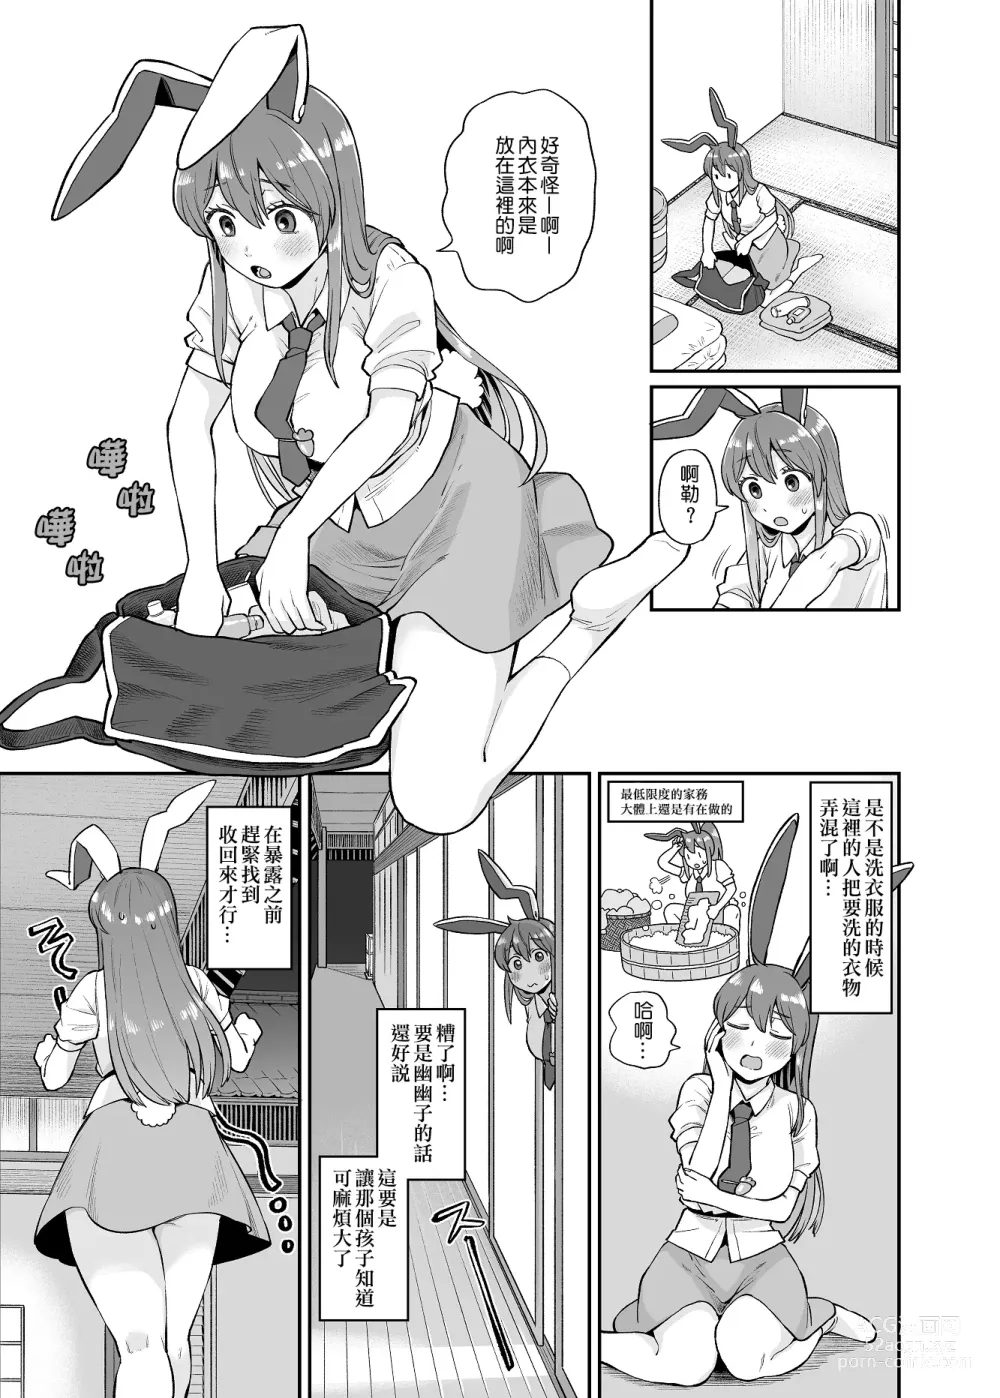 Page 5 of doujinshi 乌冬铃仙系列第1话